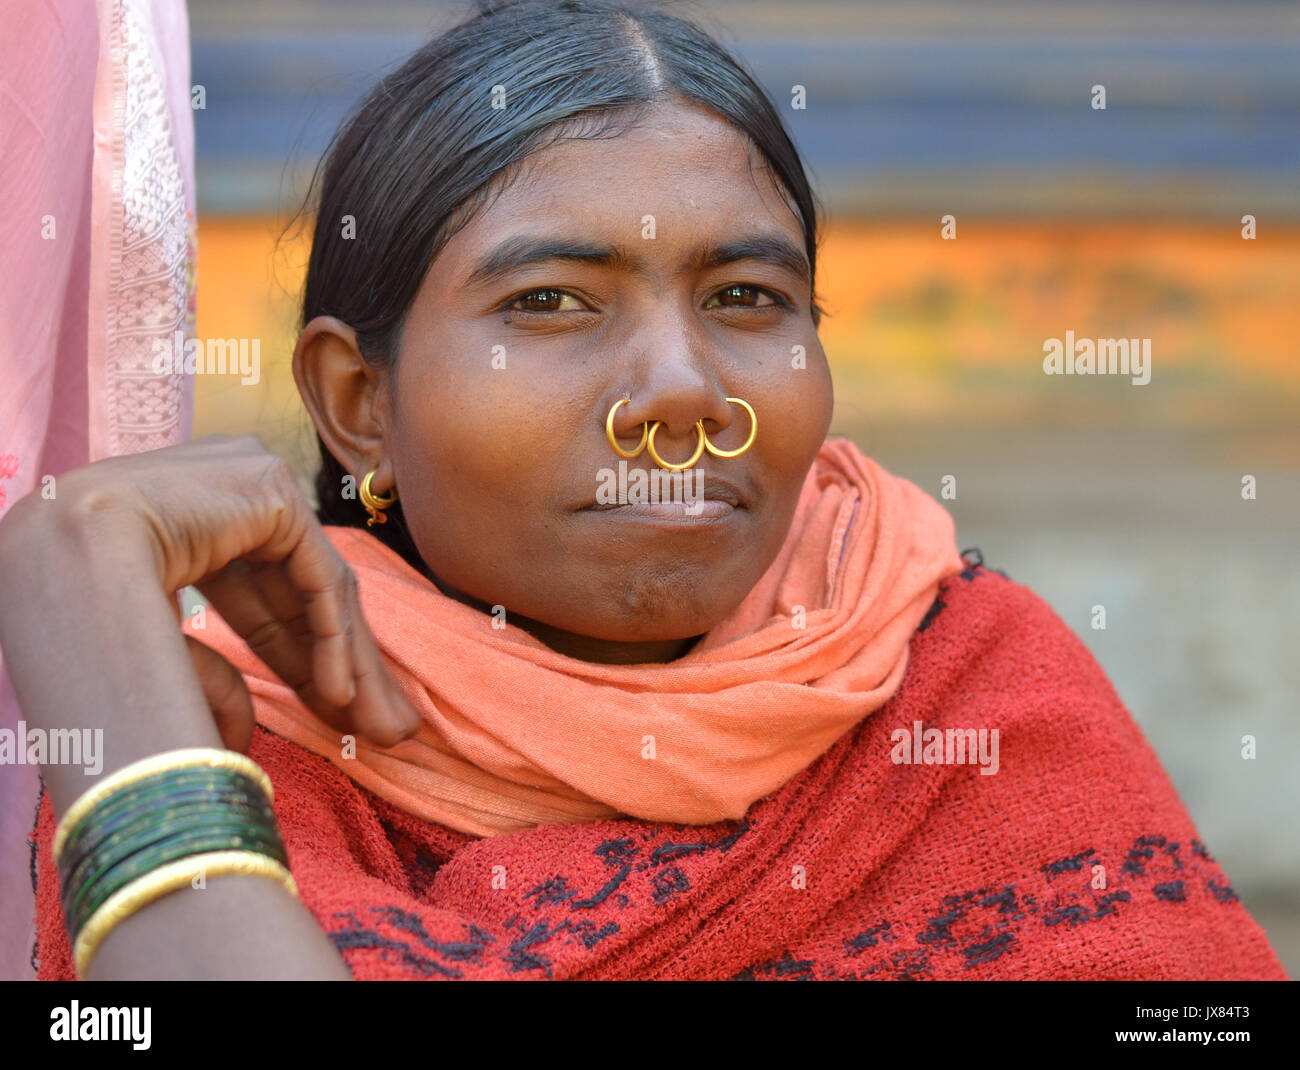 Closeup street portrait (outdoor headshot, three-quarter view) of a young Indian Adivasi market woman with three golden tribal nose rings. Stock Photo